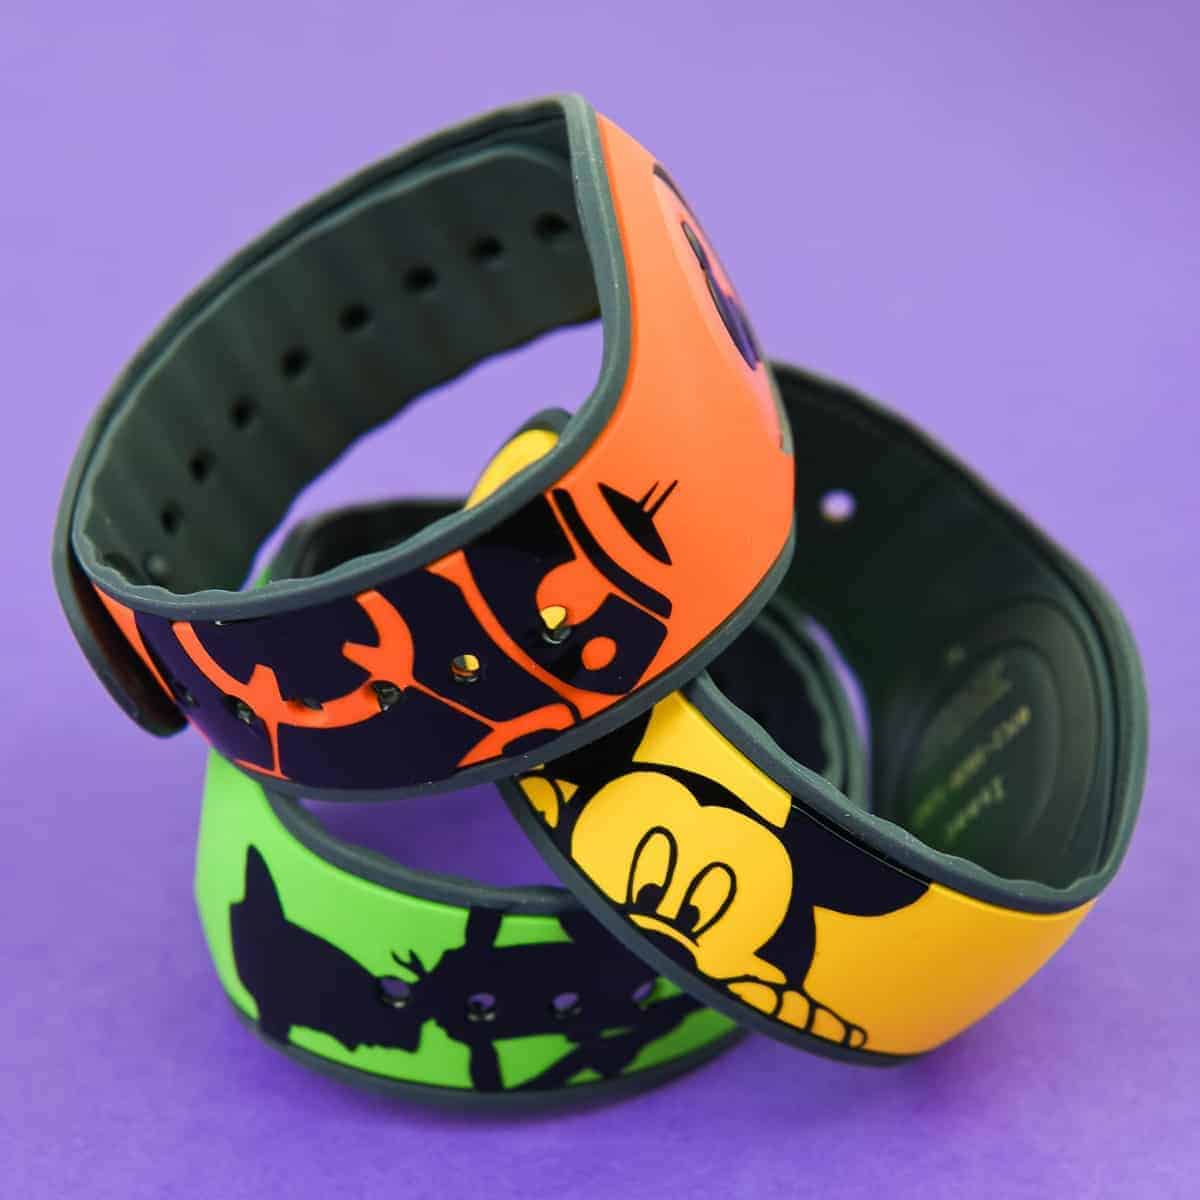 Disney Magic Bands - Get ready to show your #disneyside with custom Disney Magic Bands! All you need is 20 minutes, a Silhouette Machine, and some vinyl to end up with a new craft obsession.